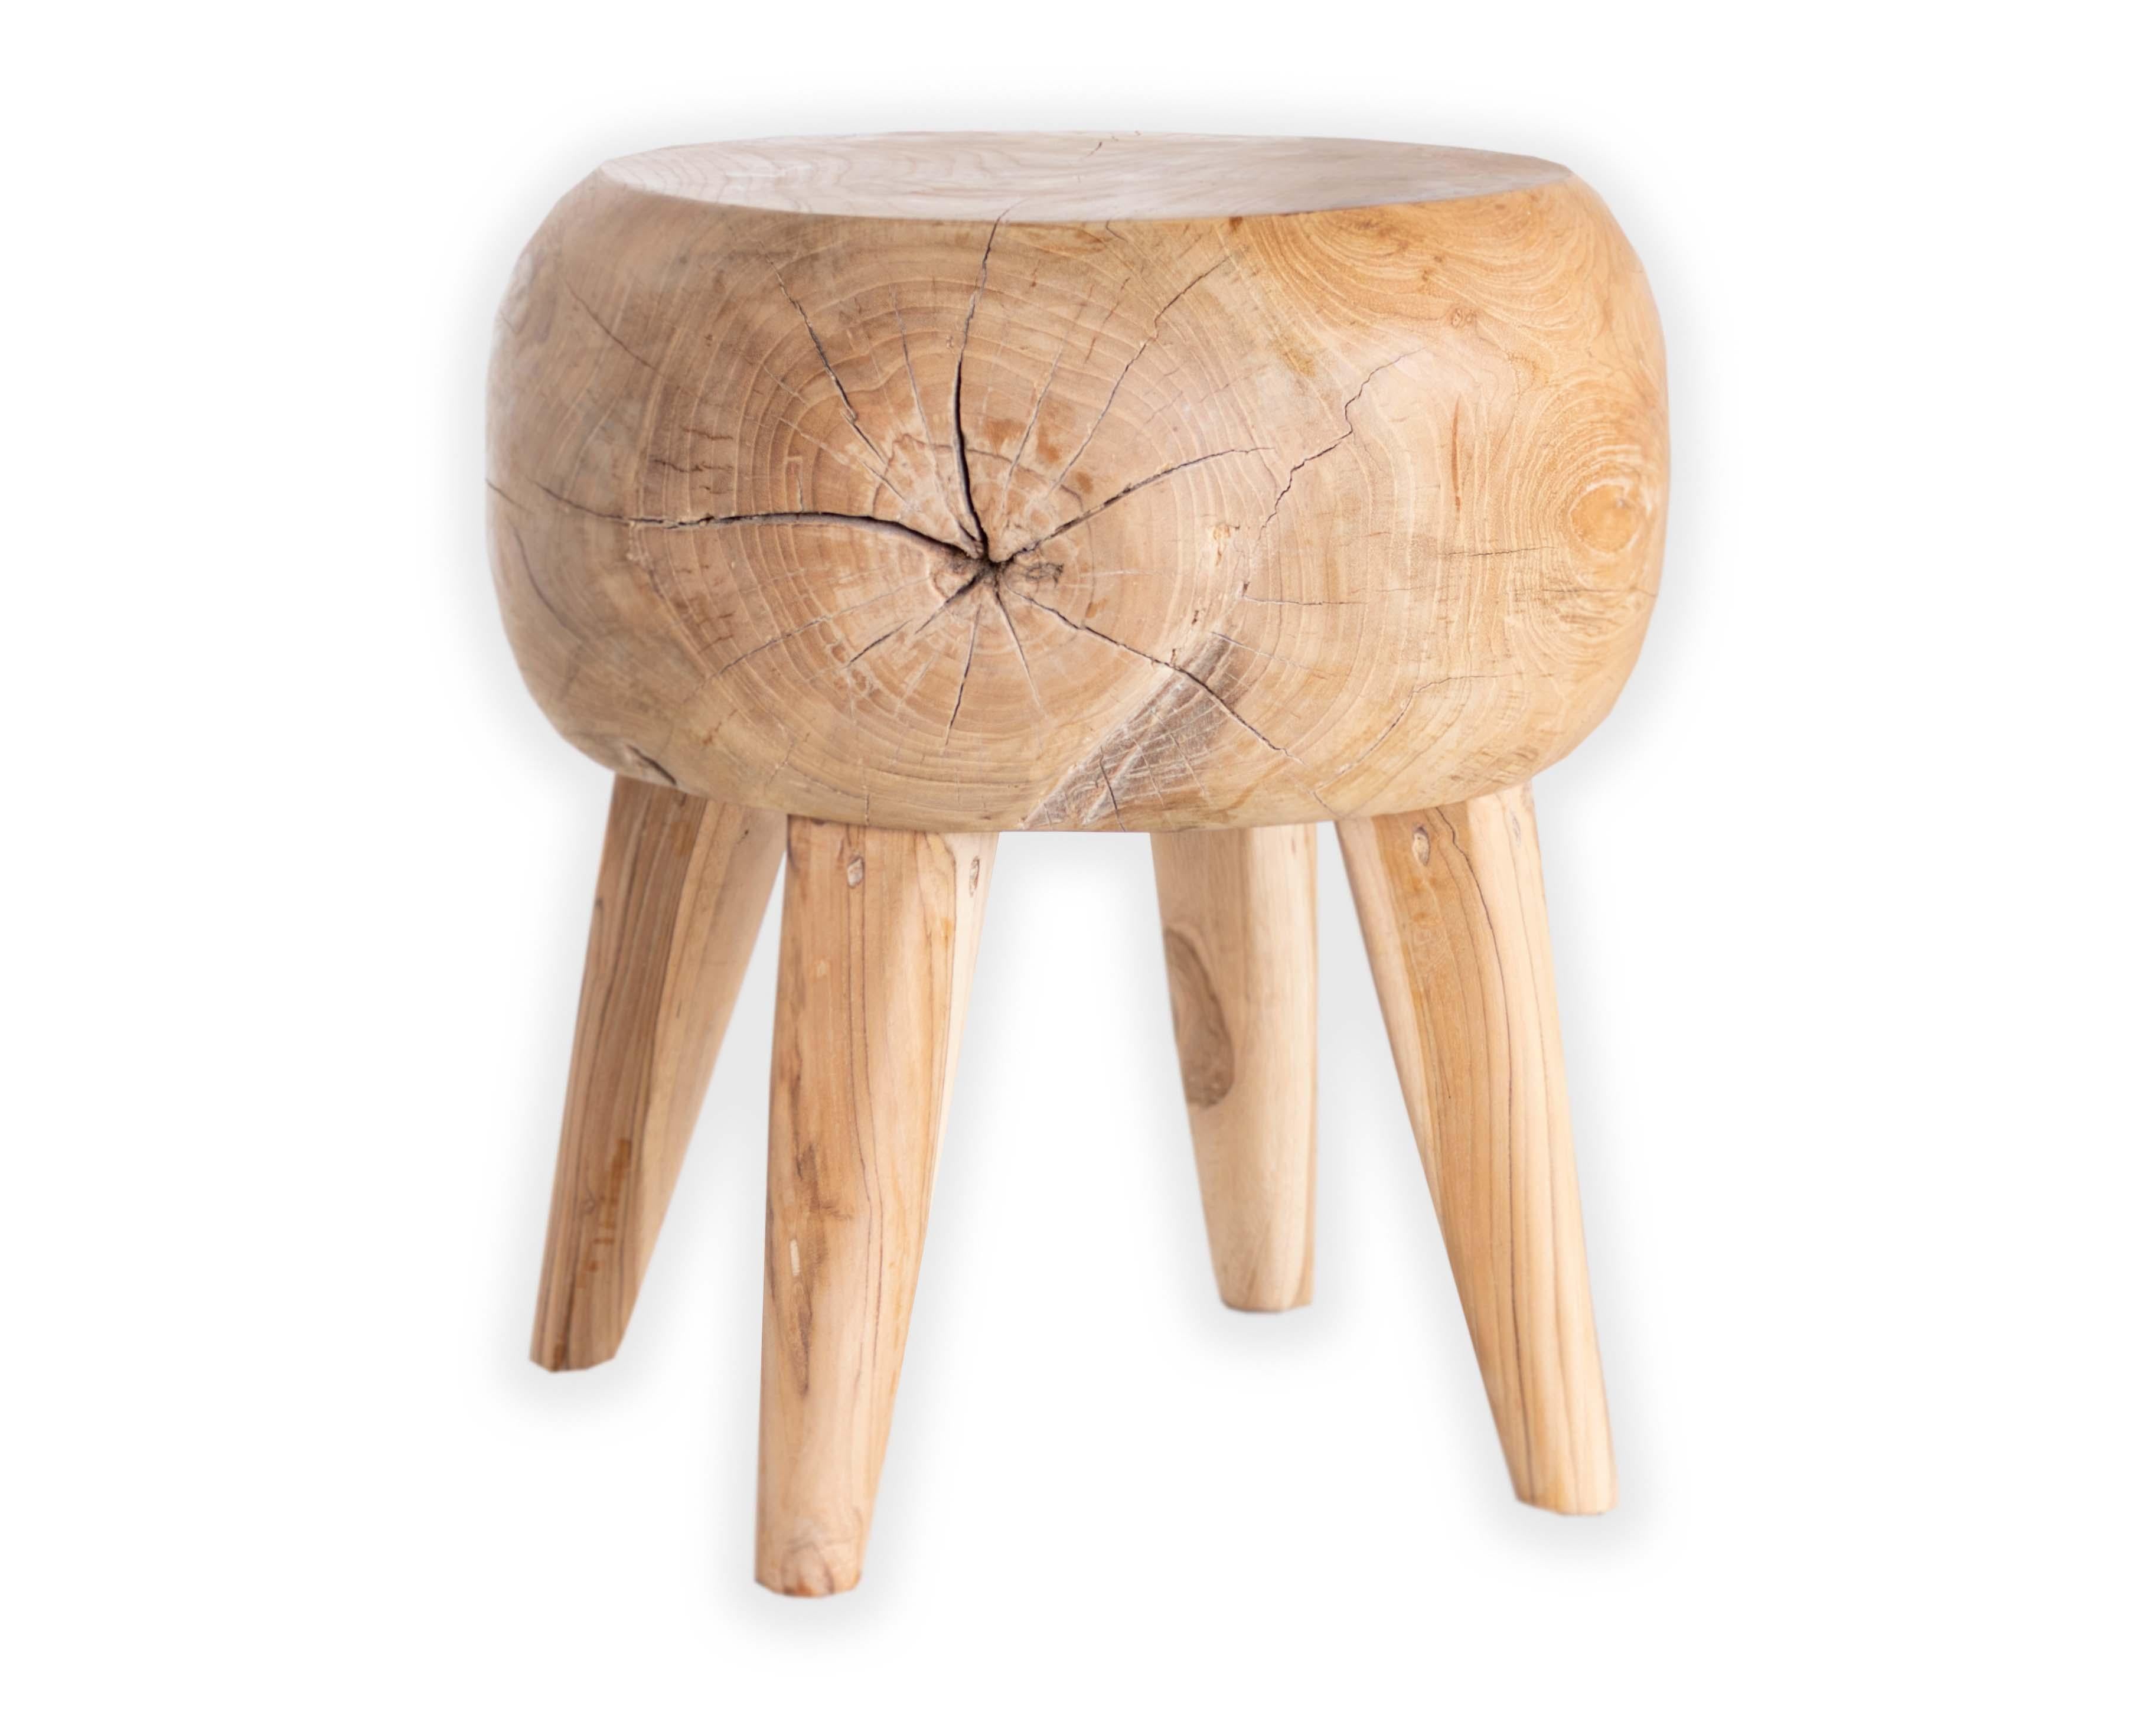 Rustic wooden end table/stool. 

Piece from our one of a kind Le Monde collection. Exclusive to Brendan Bass.

This piece is a part of Brendan Bass’s one-of-a-kind collection, Le Monde. French for “The World”, the Le Monde collection is made up of